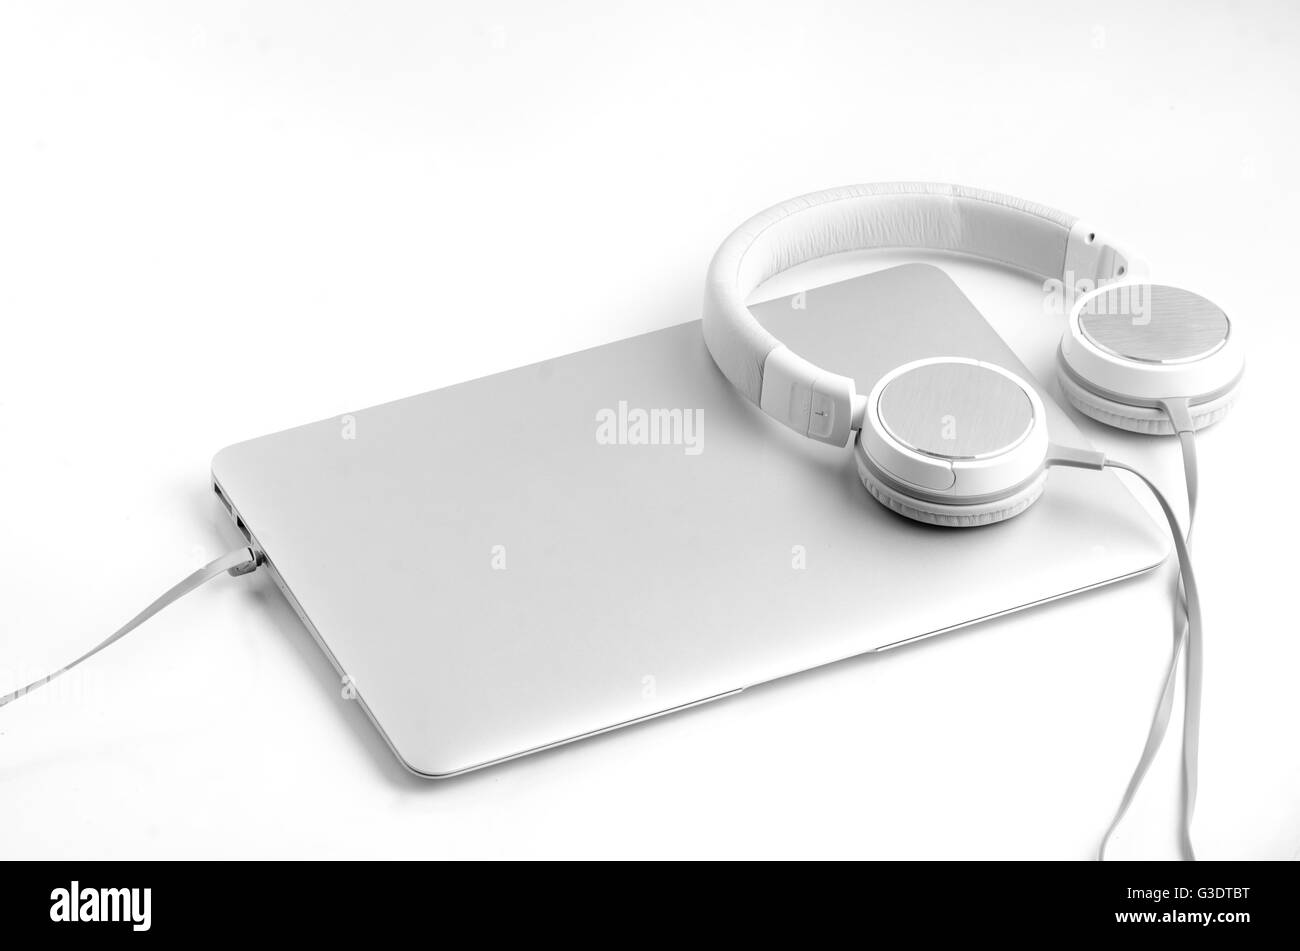 Silver laptop notebook and silveron-ear headphones isolated on white background Stock Photo